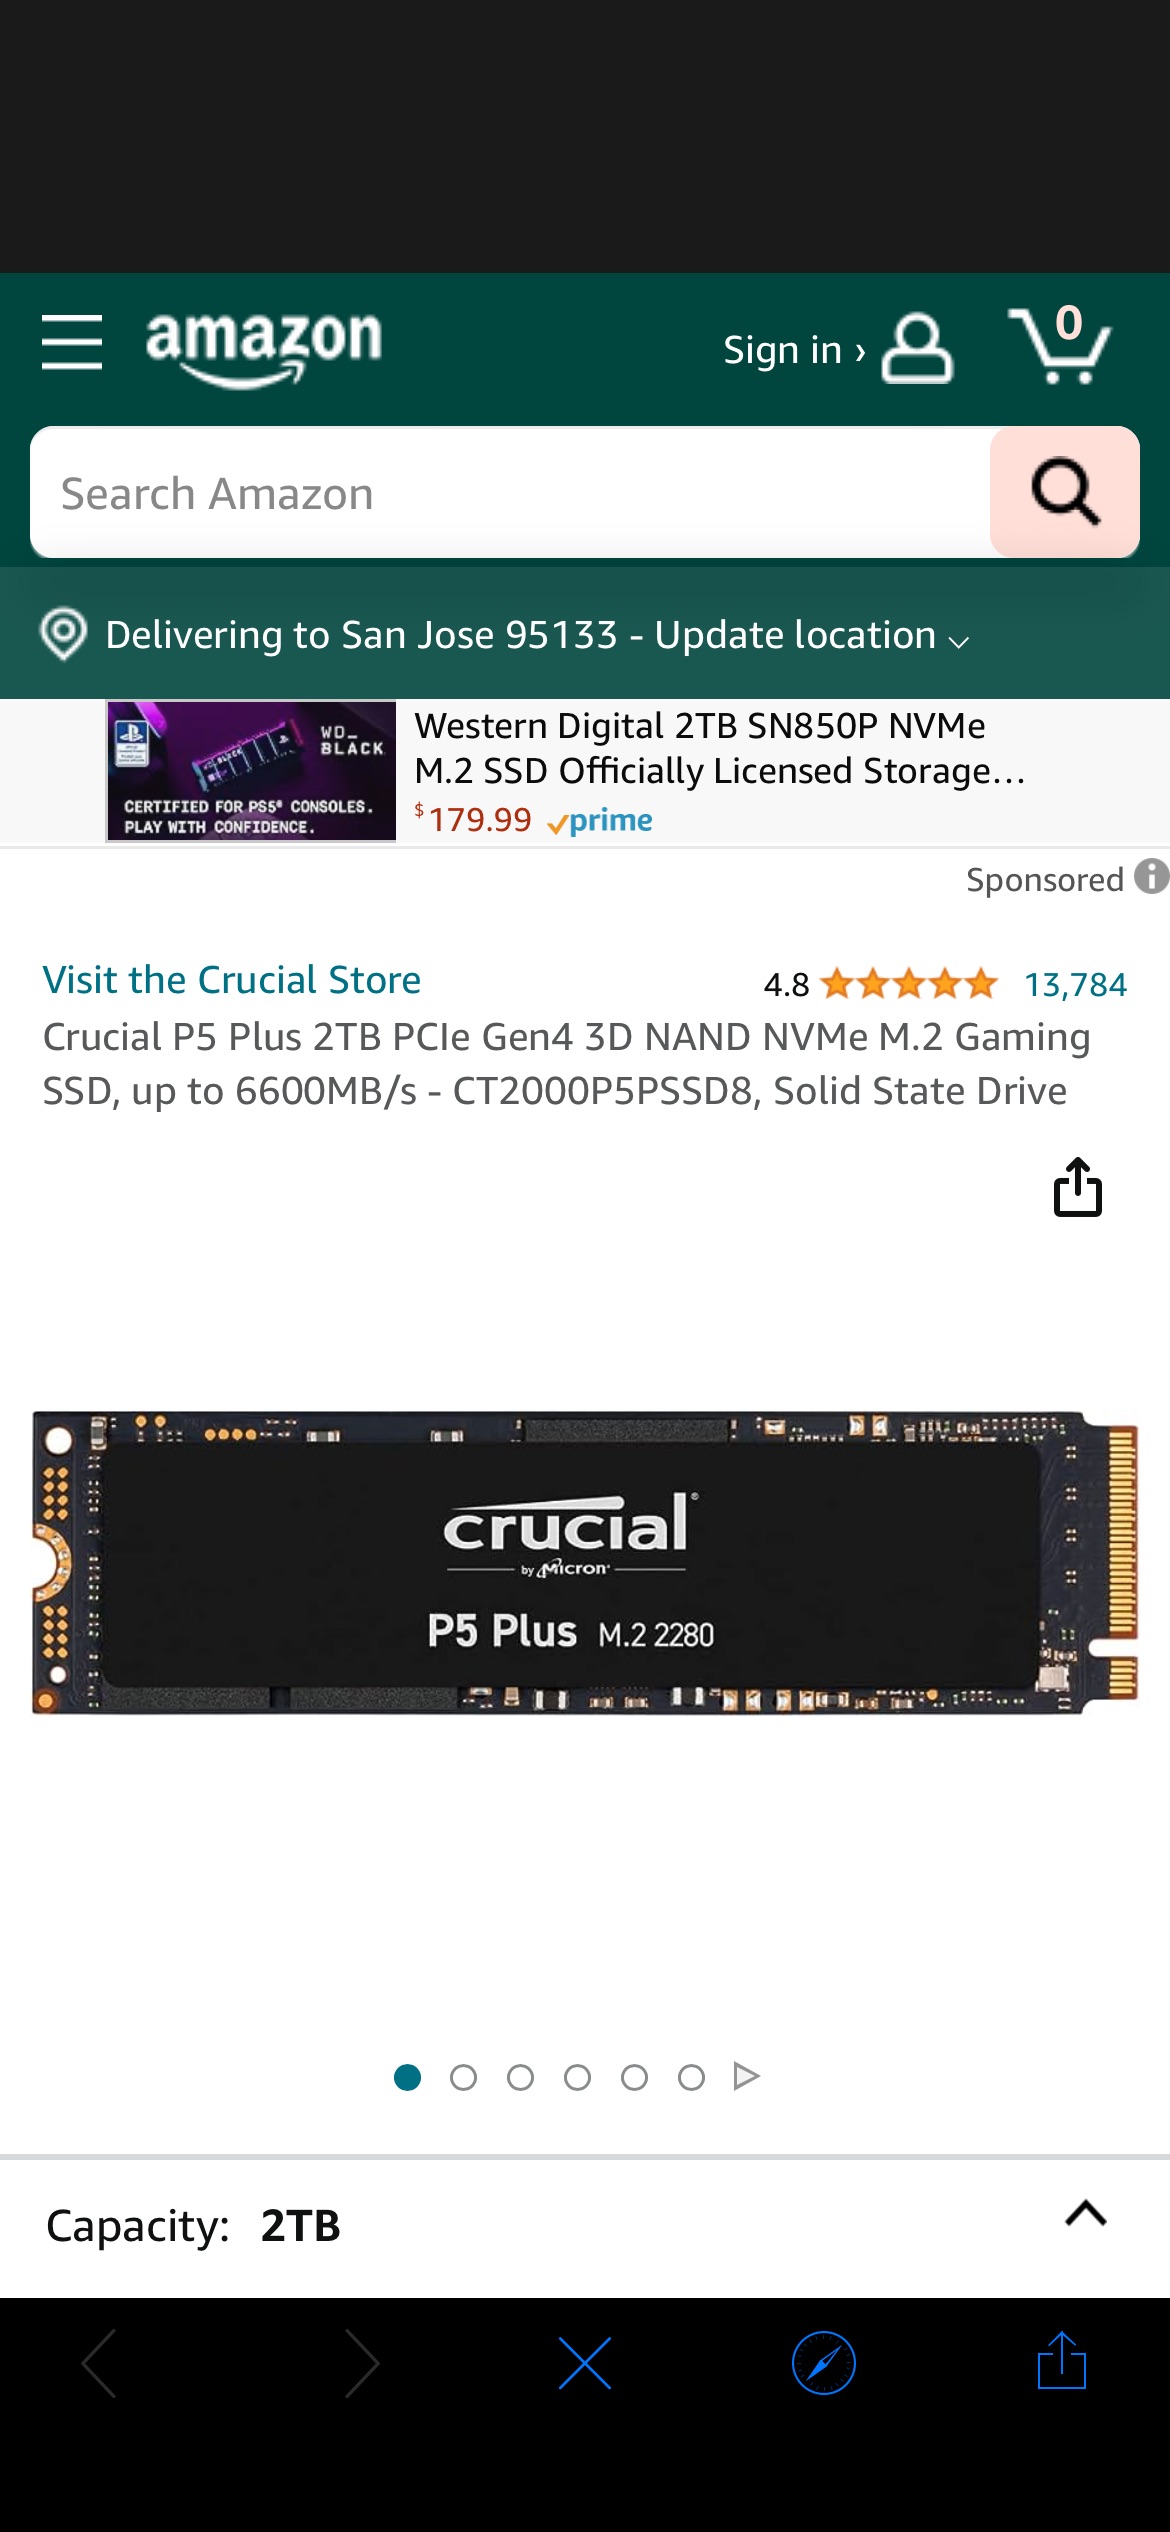 Amazon.com: Crucial P5 Plus 2TB PCIe Gen4 3D NAND NVMe M.2 Gaming SSD, up to 6600MB/s - CT2000P5PSSD8, Solid State Drive : Video Games